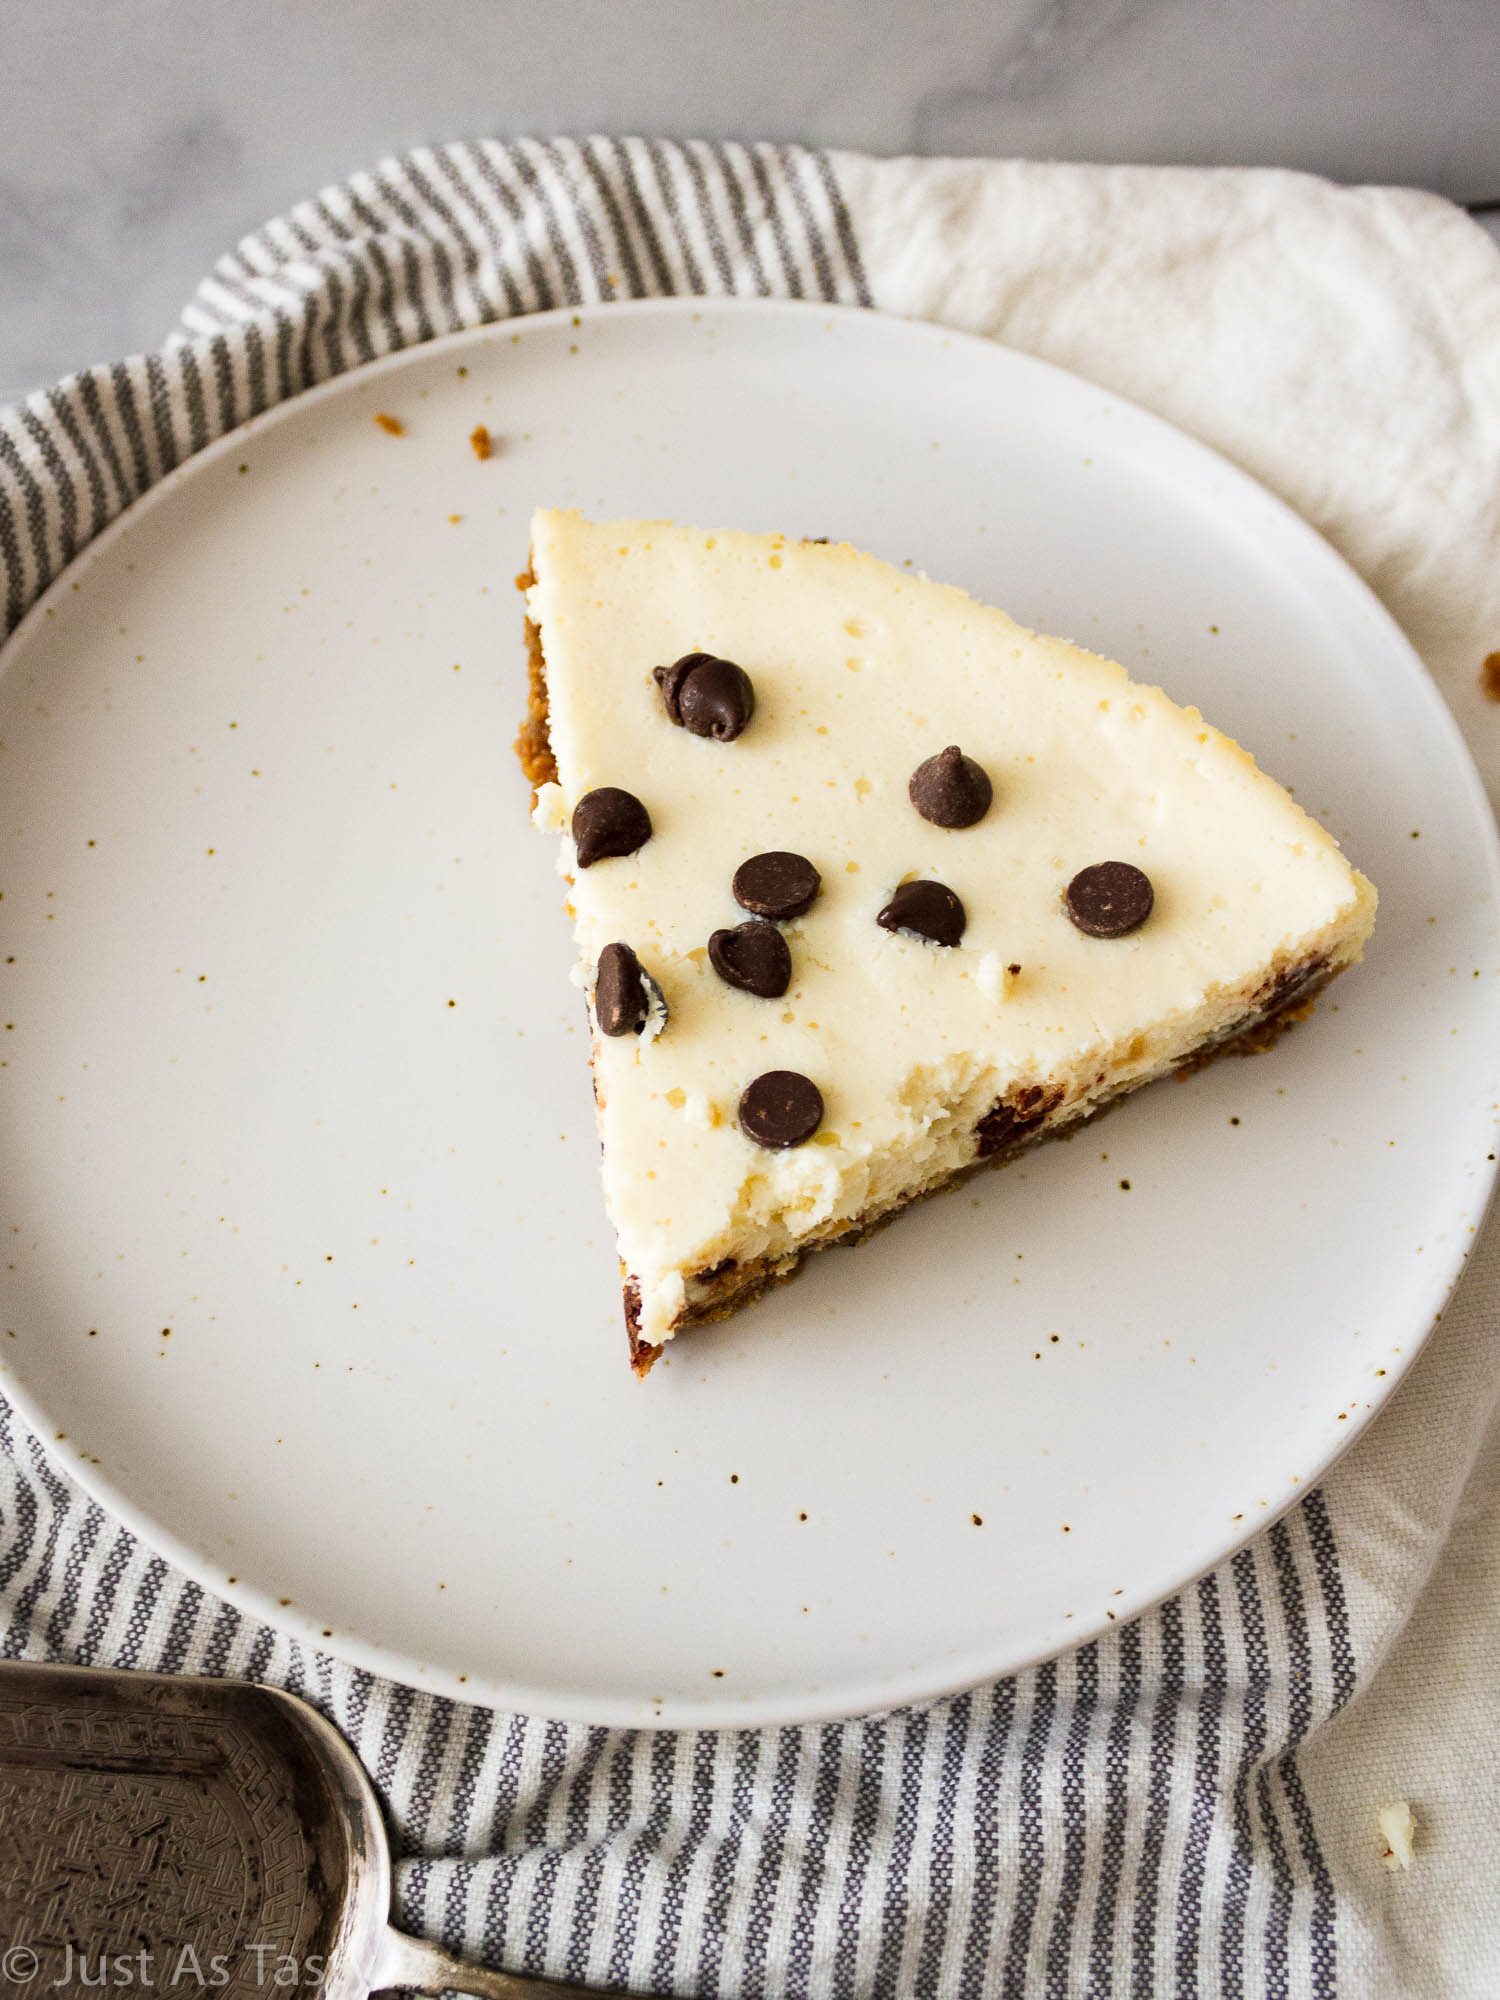 Slice of cheesecake topped with chocolate chips.